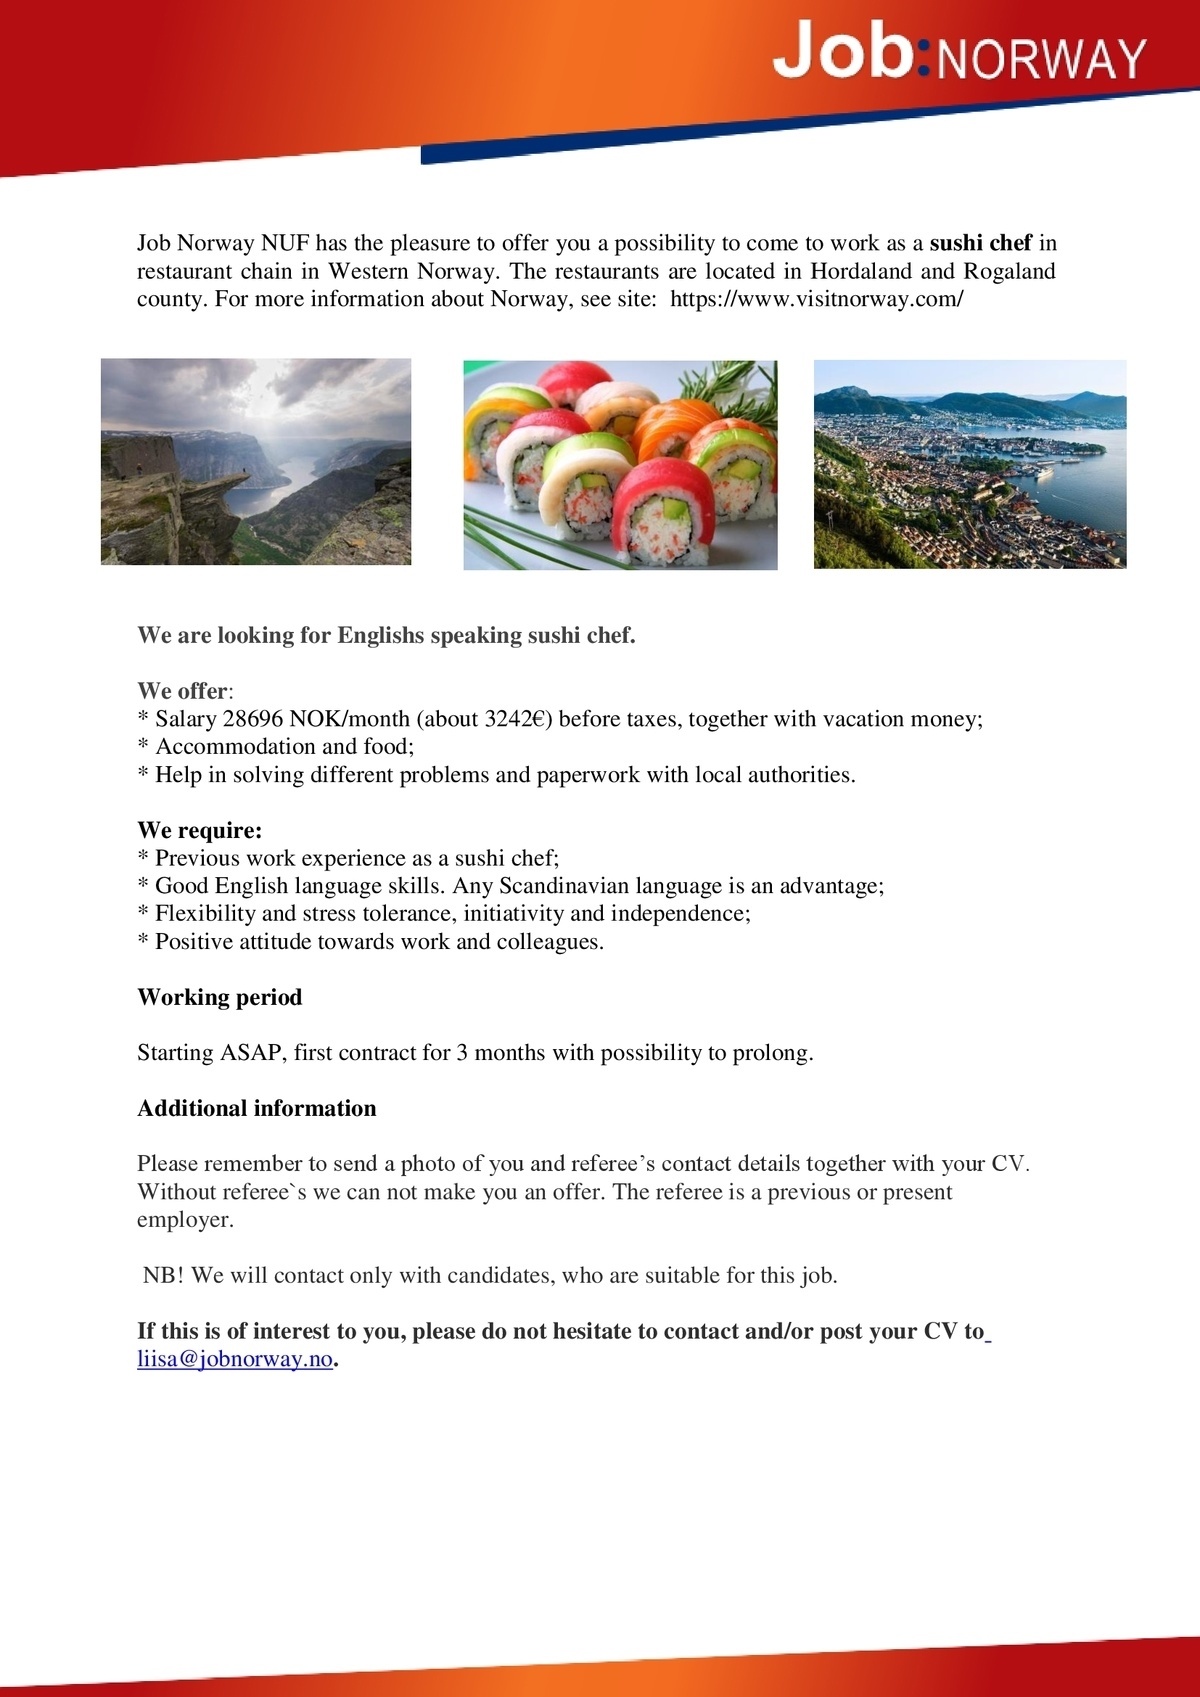 Job Norway NUF Sushi chef to Western Norway